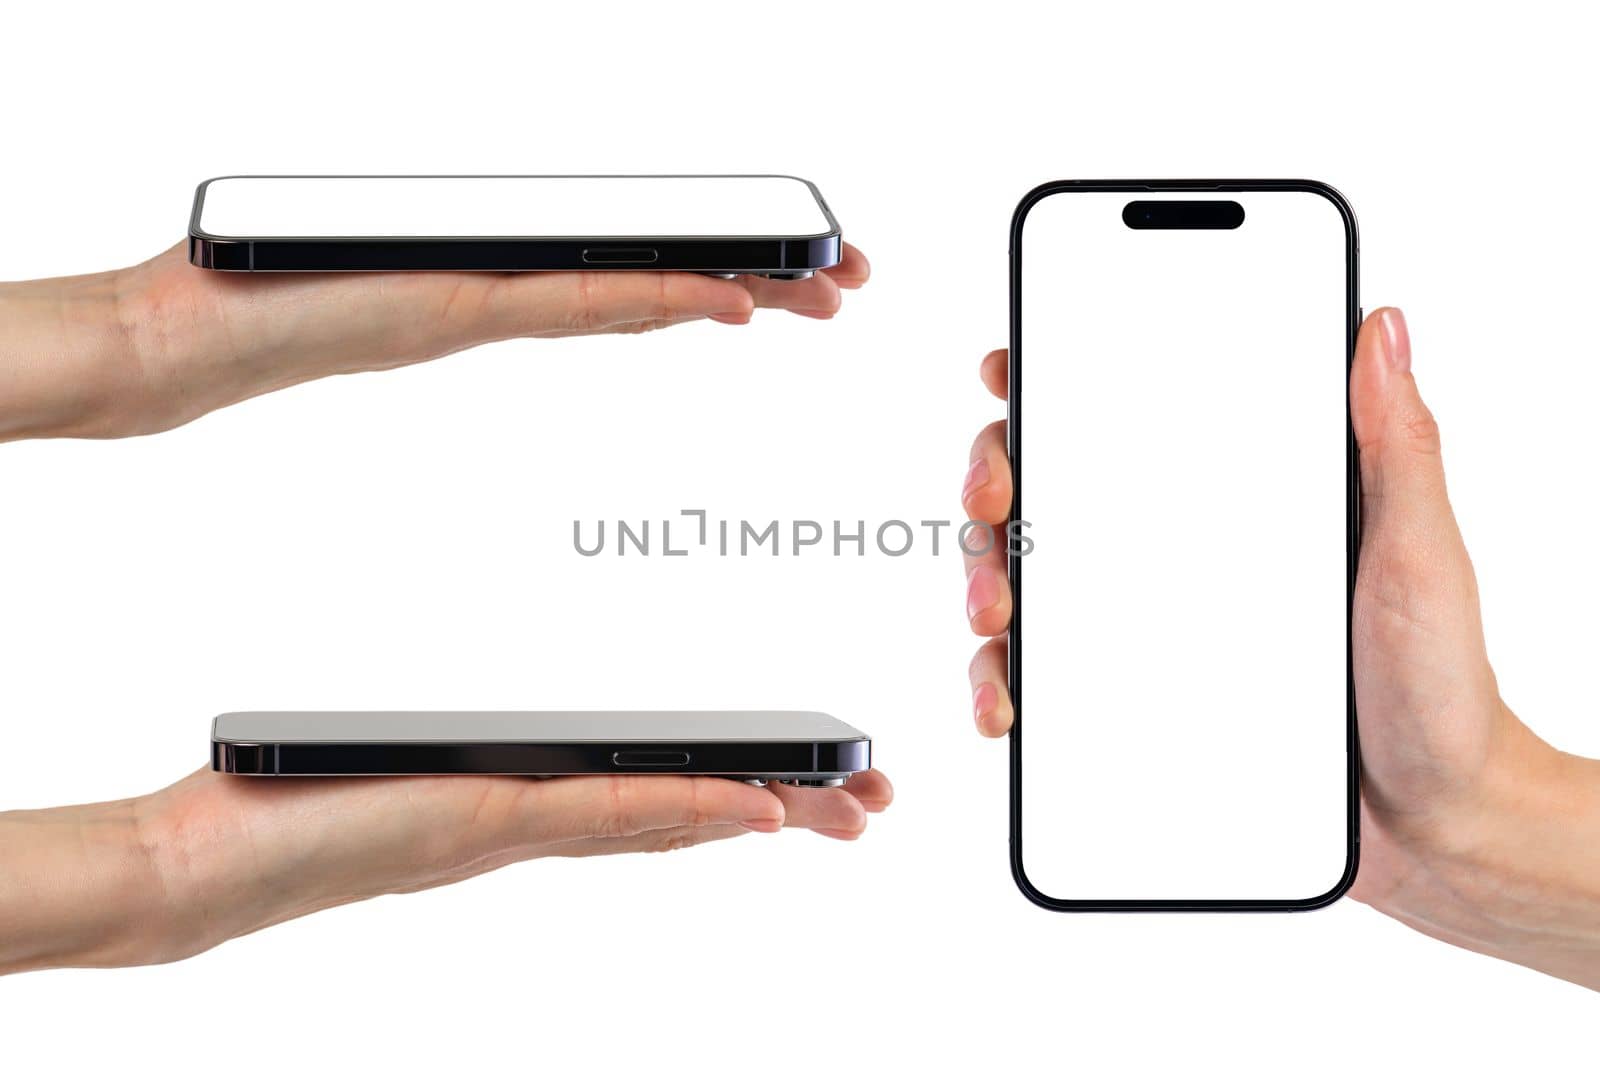 Phone in hand, set. Modern, new phone in hand isolated on white background from different angles. Mockup set, smartphones in hands from different sides to be inserted into the project by SERSOL